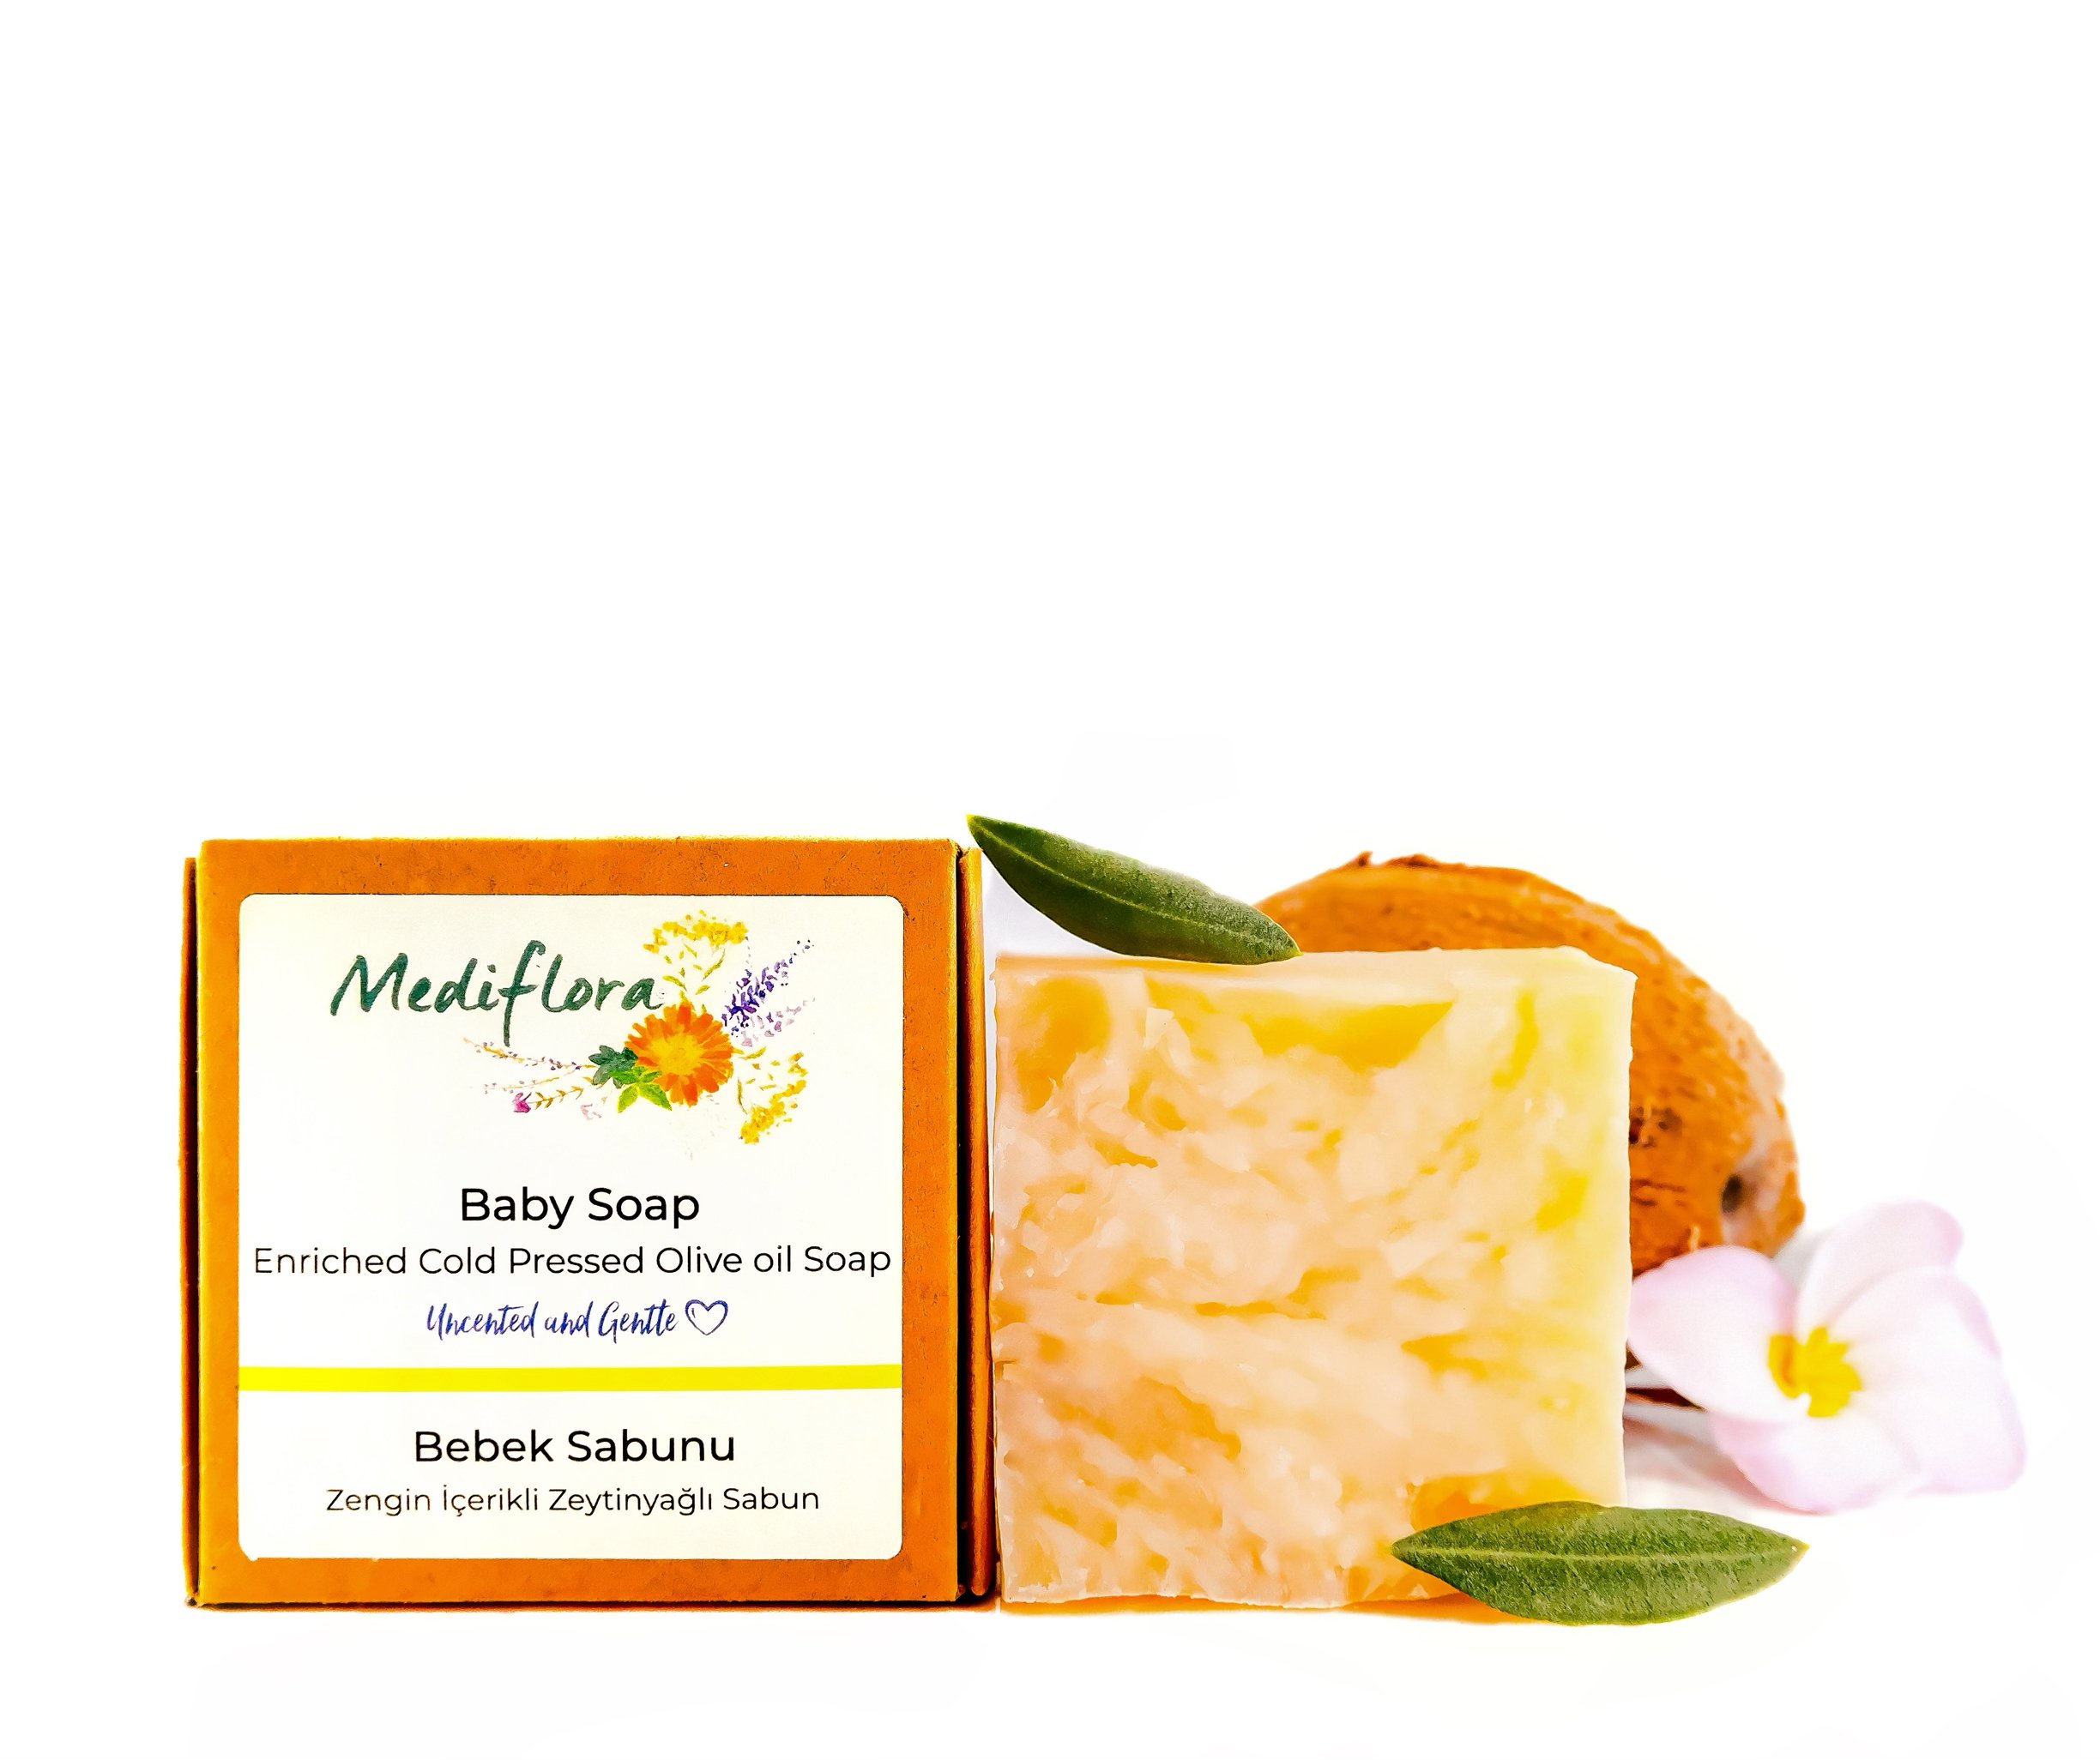 Baby Soap - Enriched Cold Pressed Olive Oil Soap